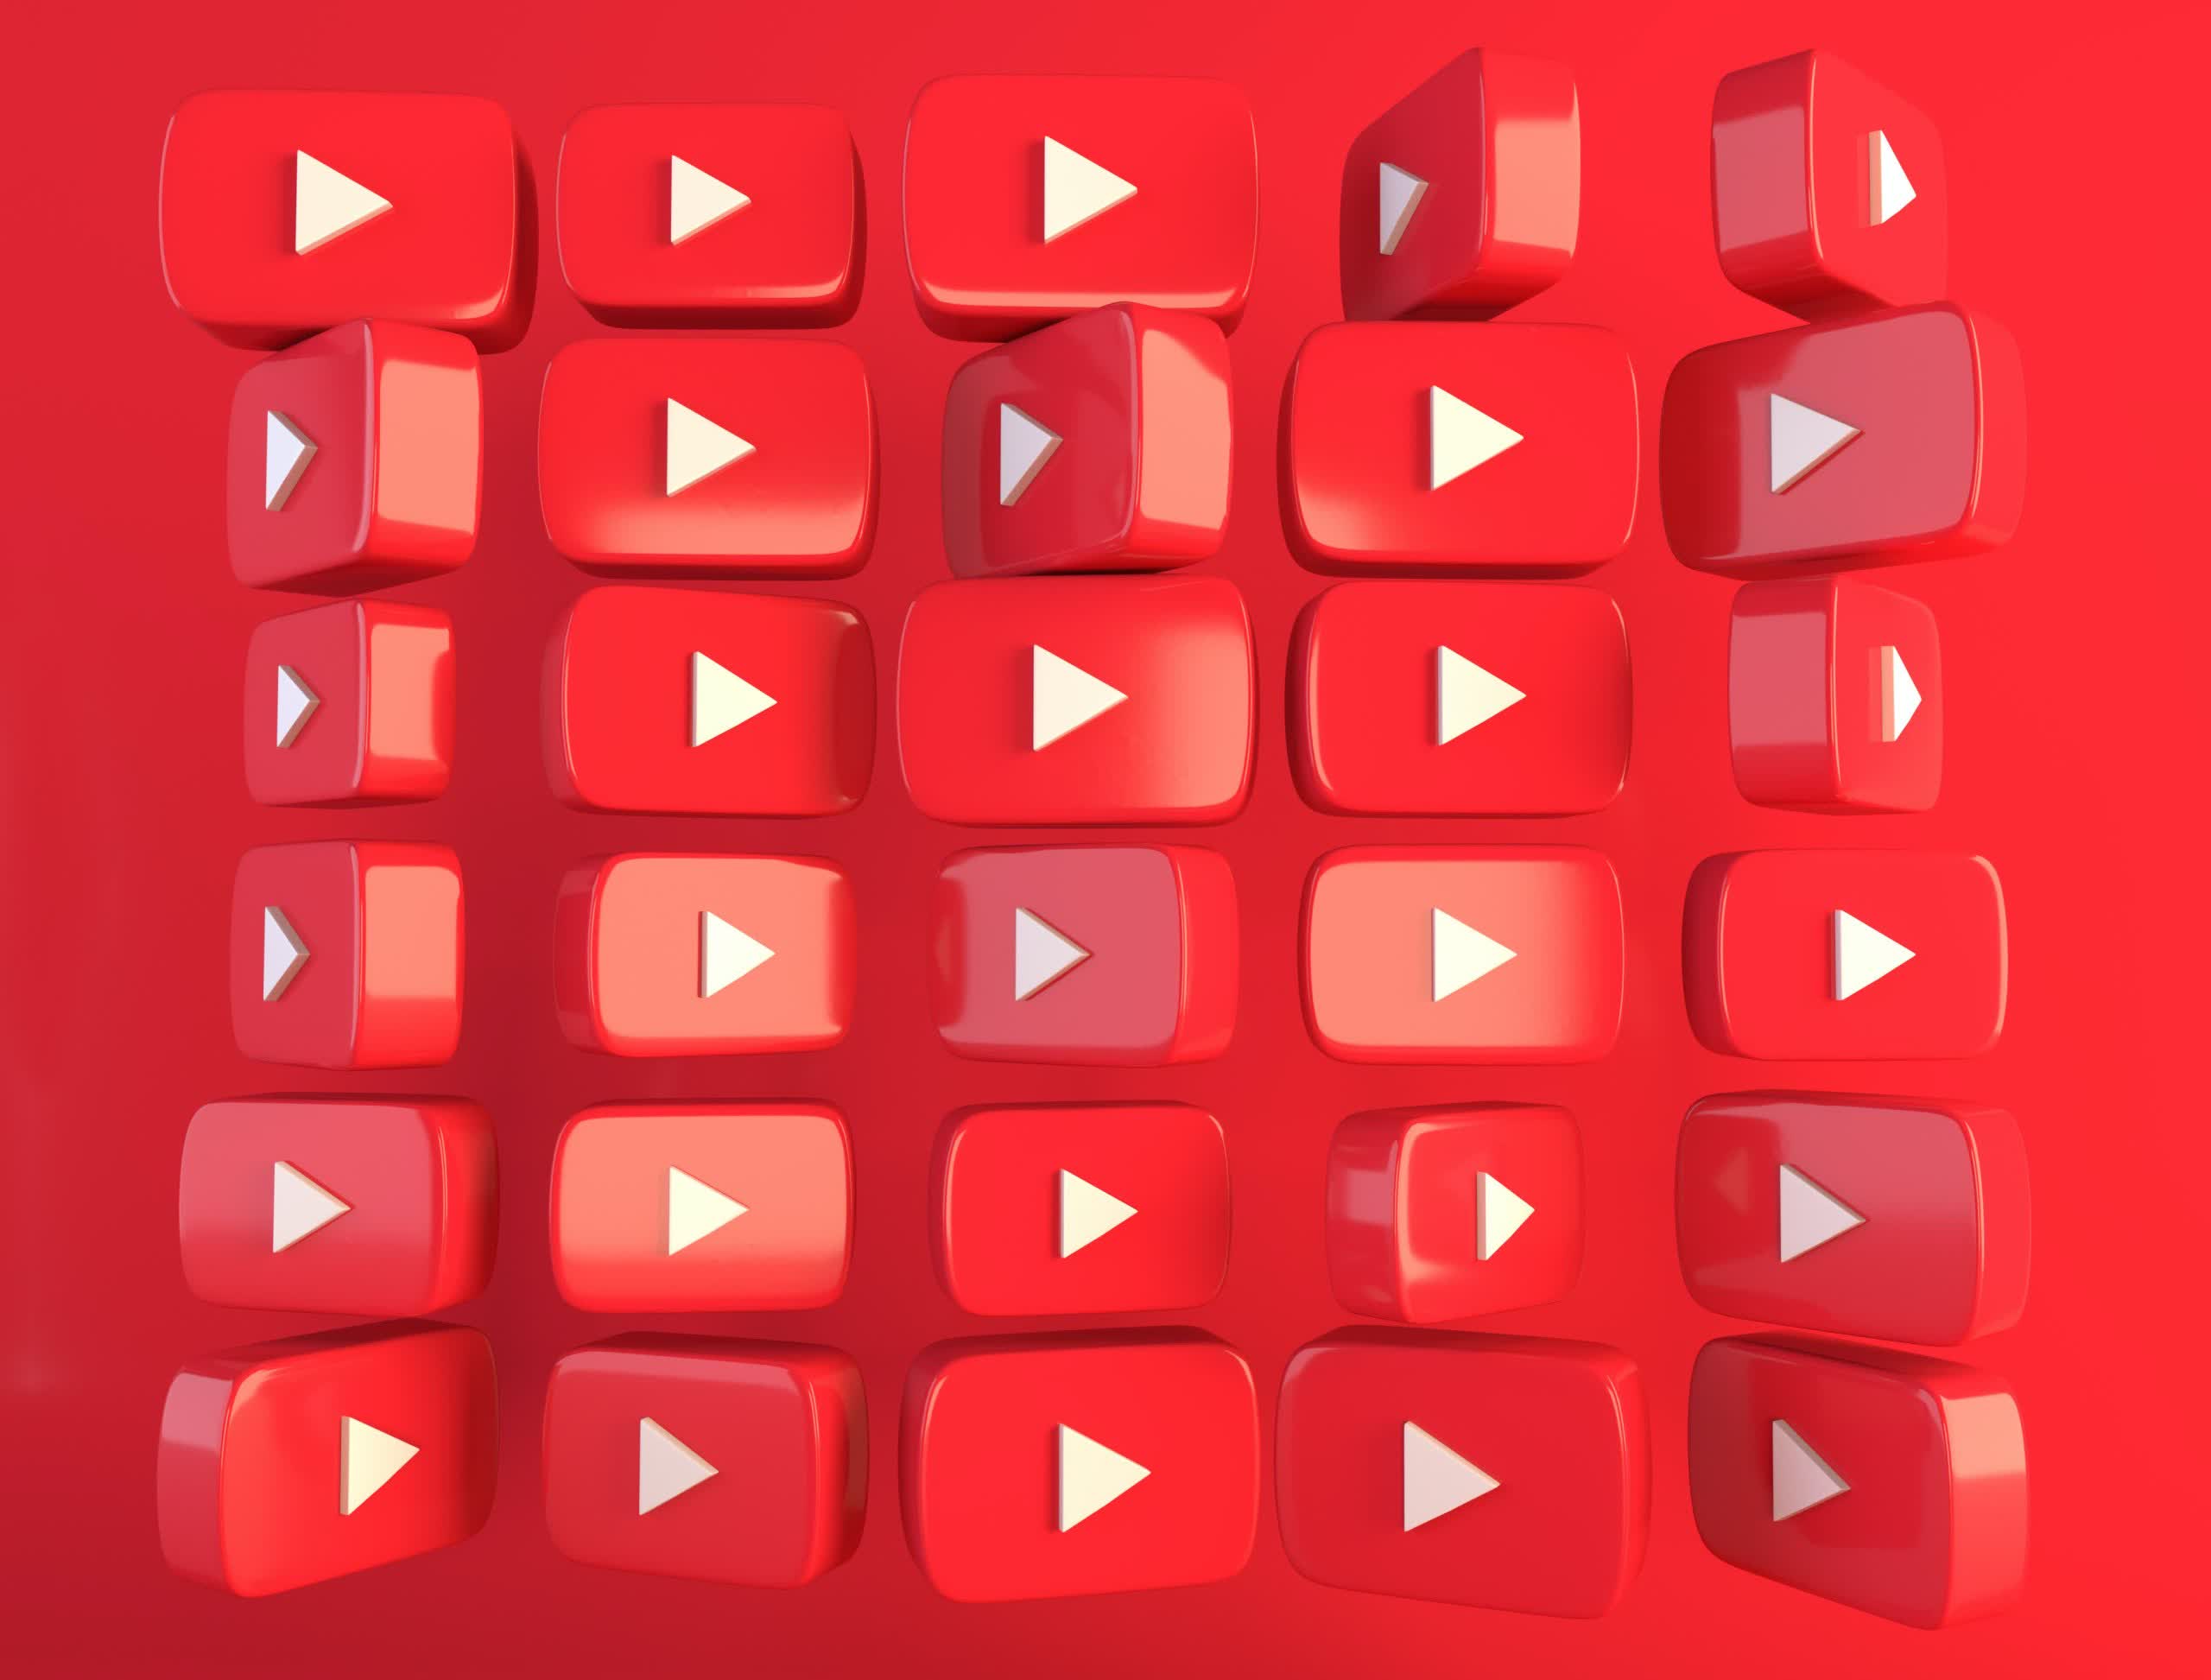 YouTube begins fighting ad blockers by slowing down load times